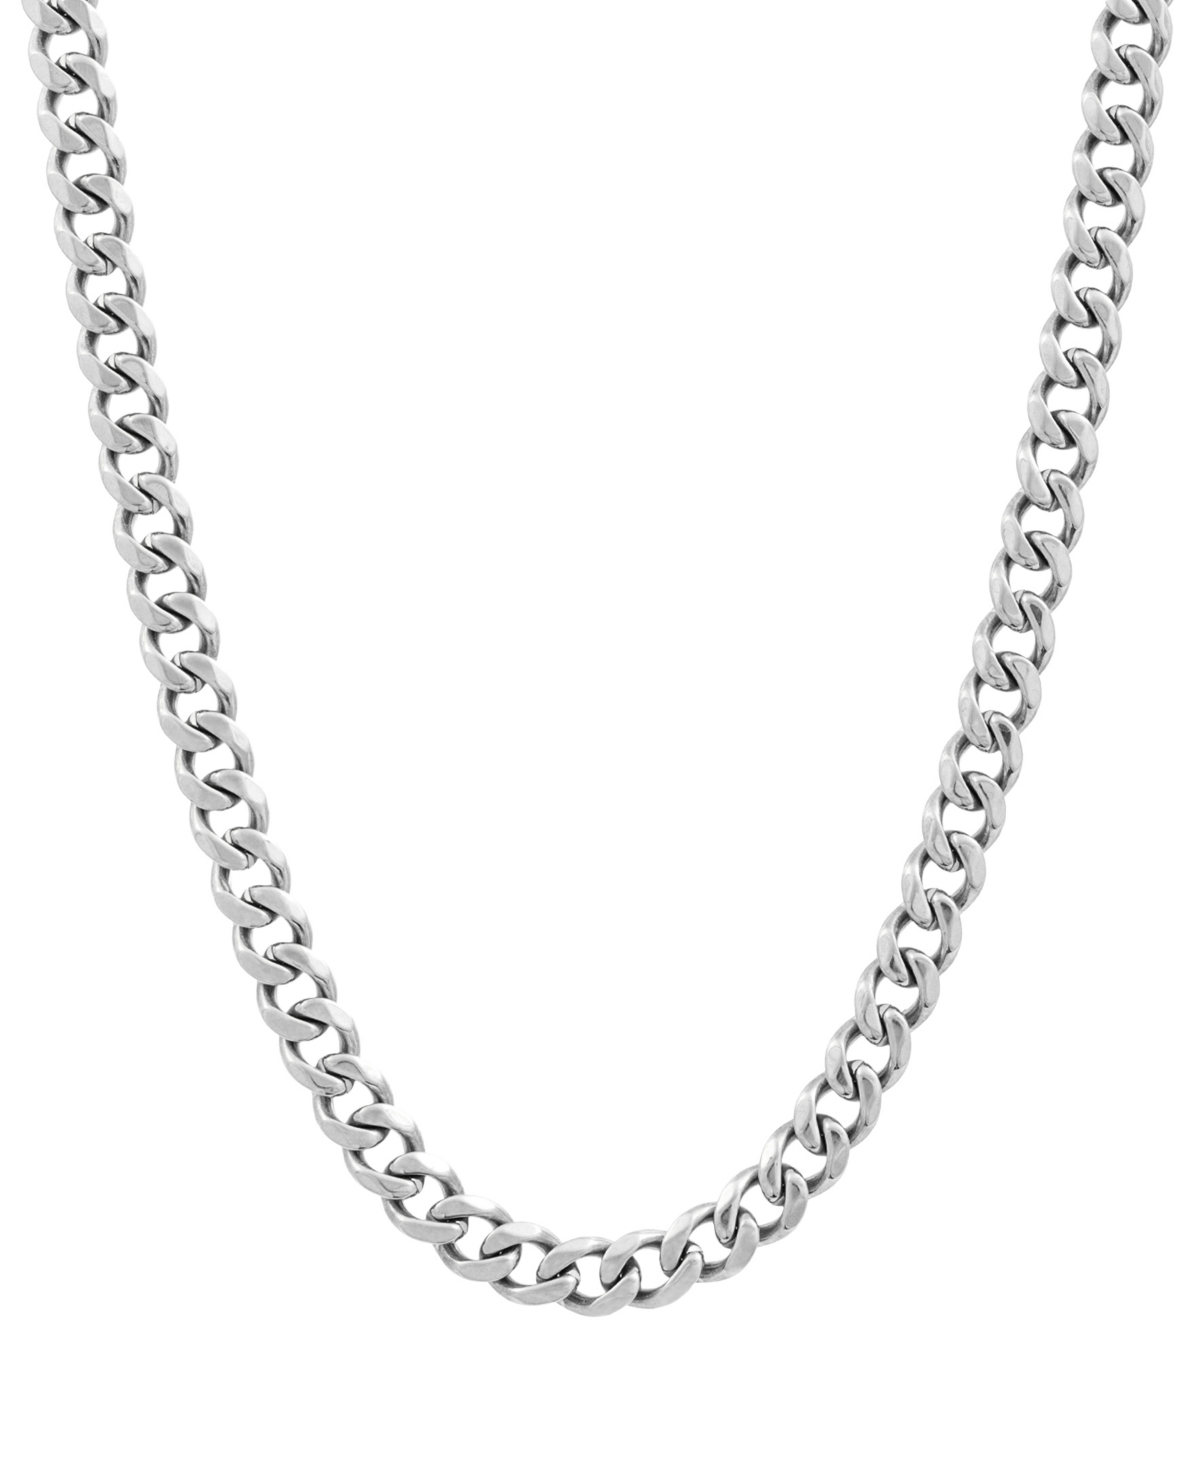 Shop Legacy For Men By Simone I. Smith Men's Flat Curb Link 24" Chain Necklace In Stainless Steel